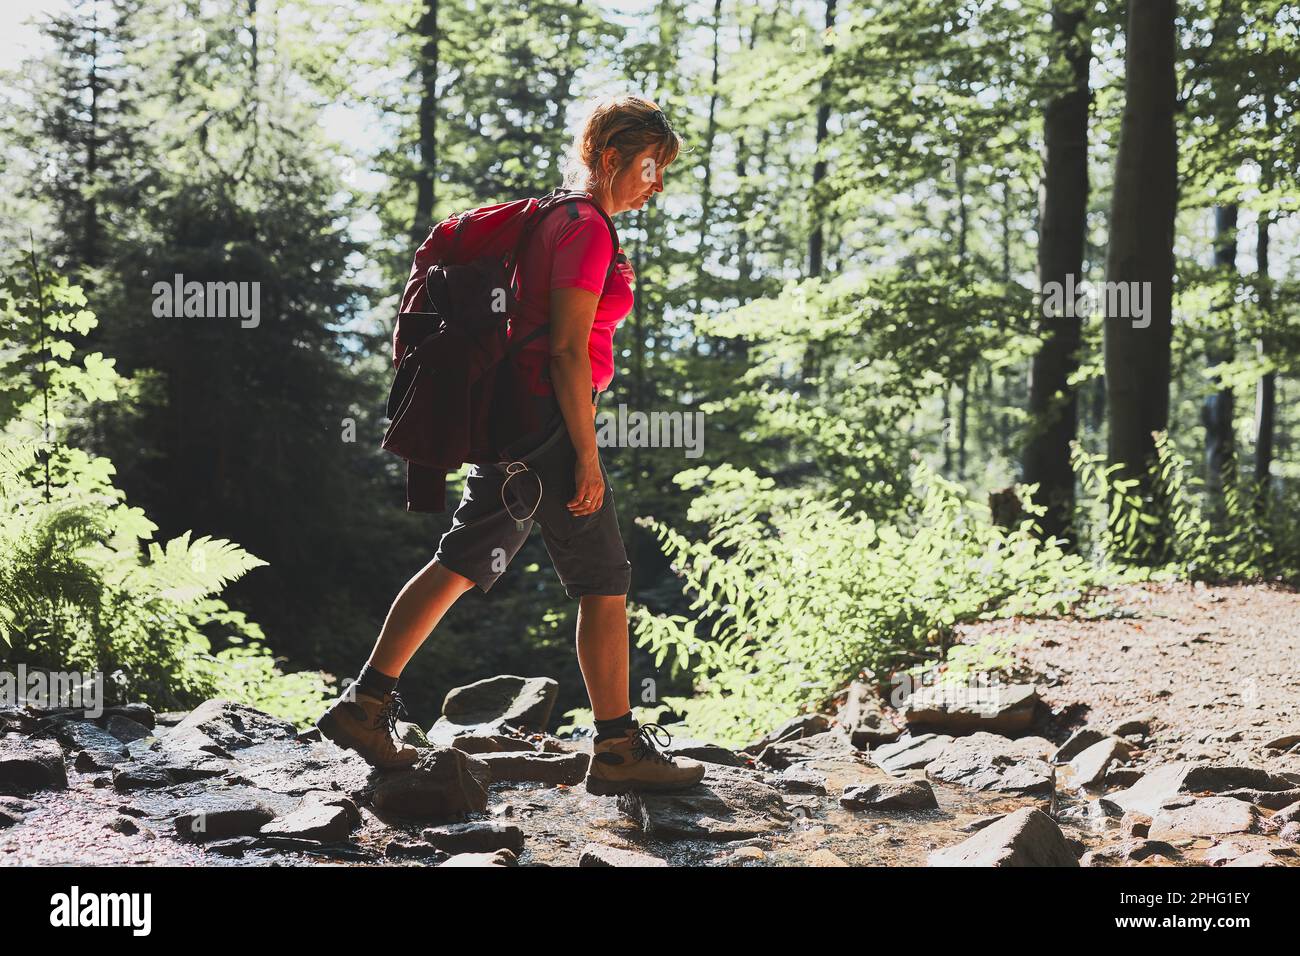 Woman with backpack hiking in mountains, spending summer vacation close to nature. Woman walking on path among bushes and trees Stock Photo